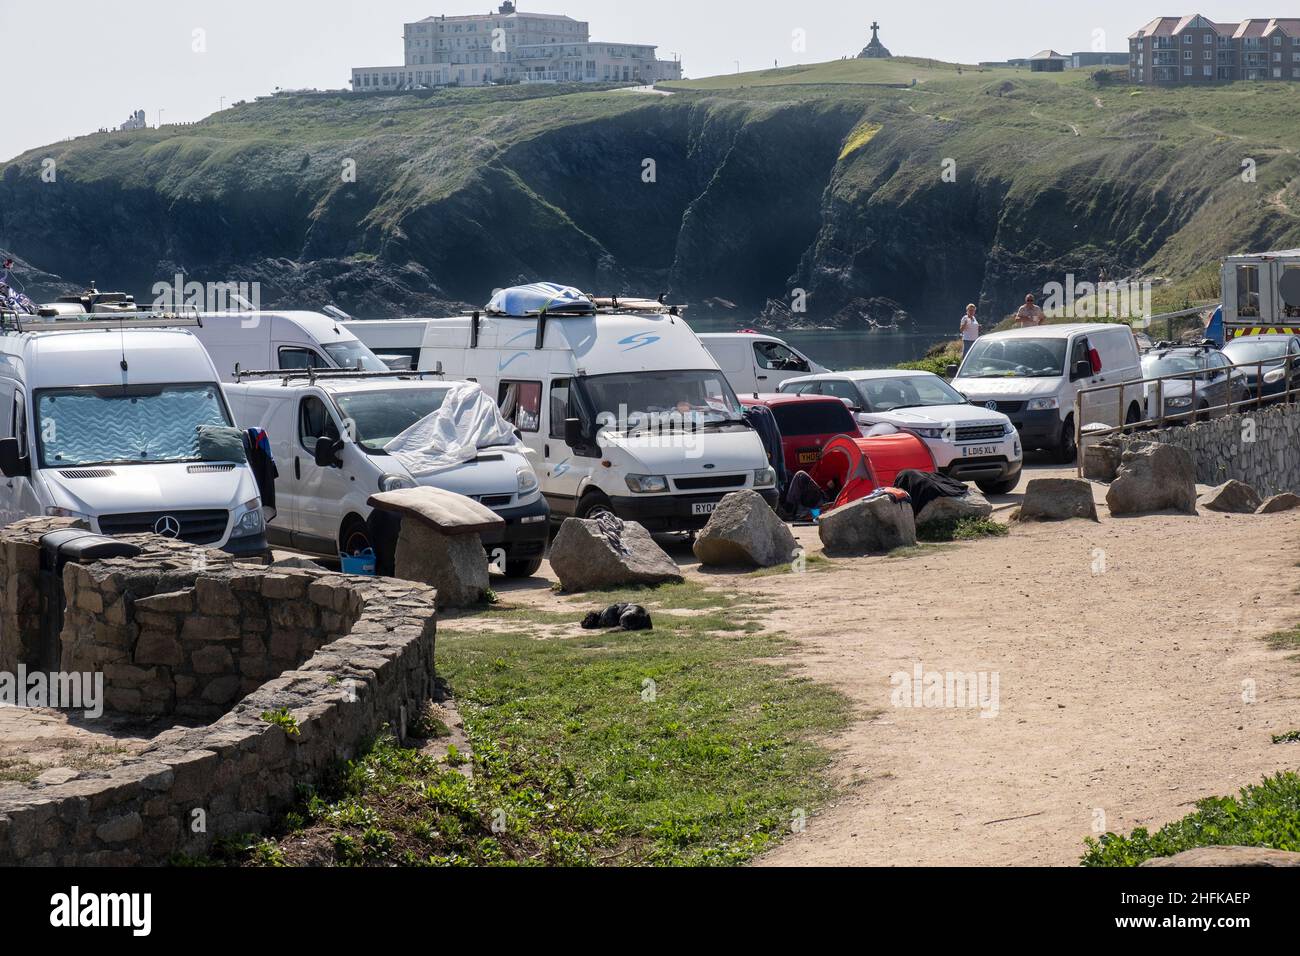 Van lifers and staycation holidaymakers fill the car park on Towan Head in Newquay in Cornwall. Stock Photo